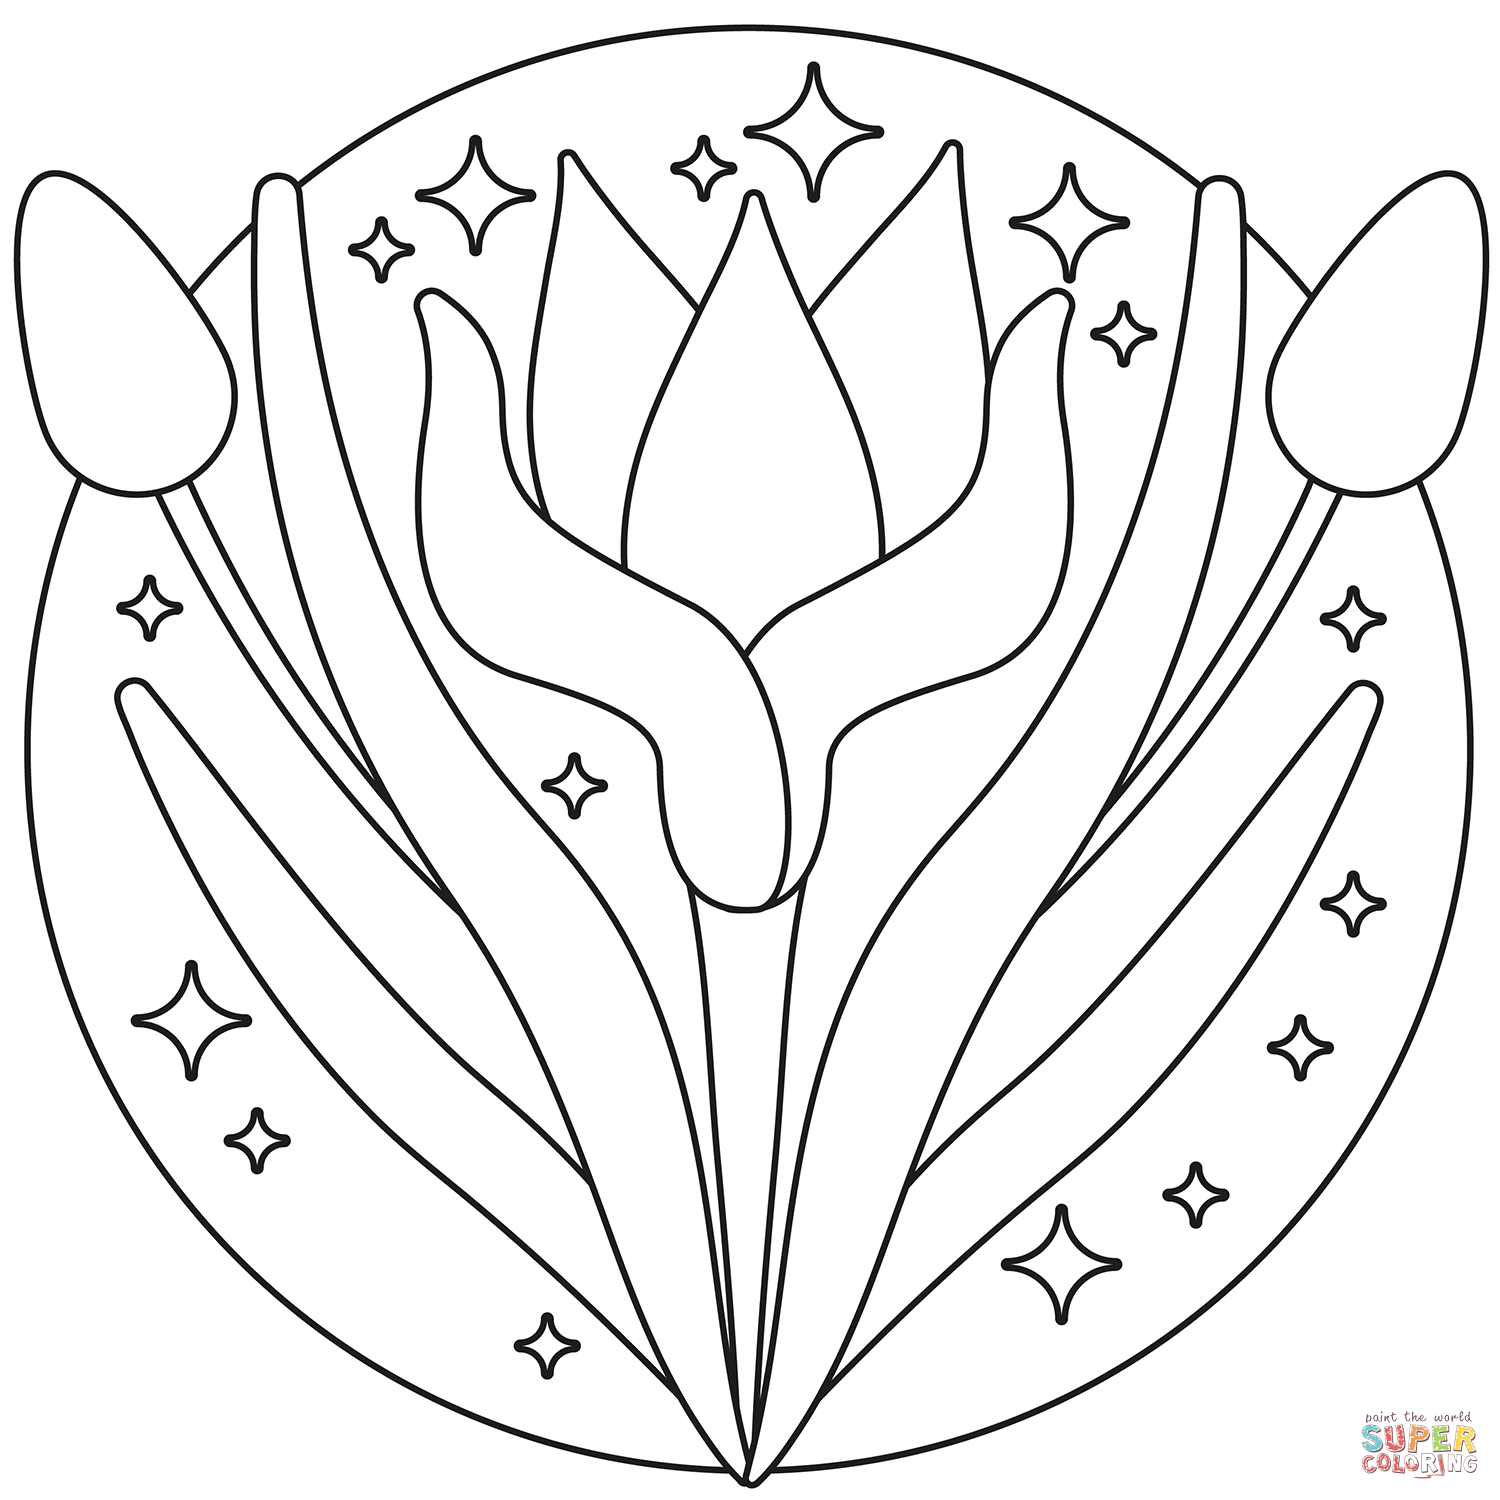 Spring Flower Coloring Pages